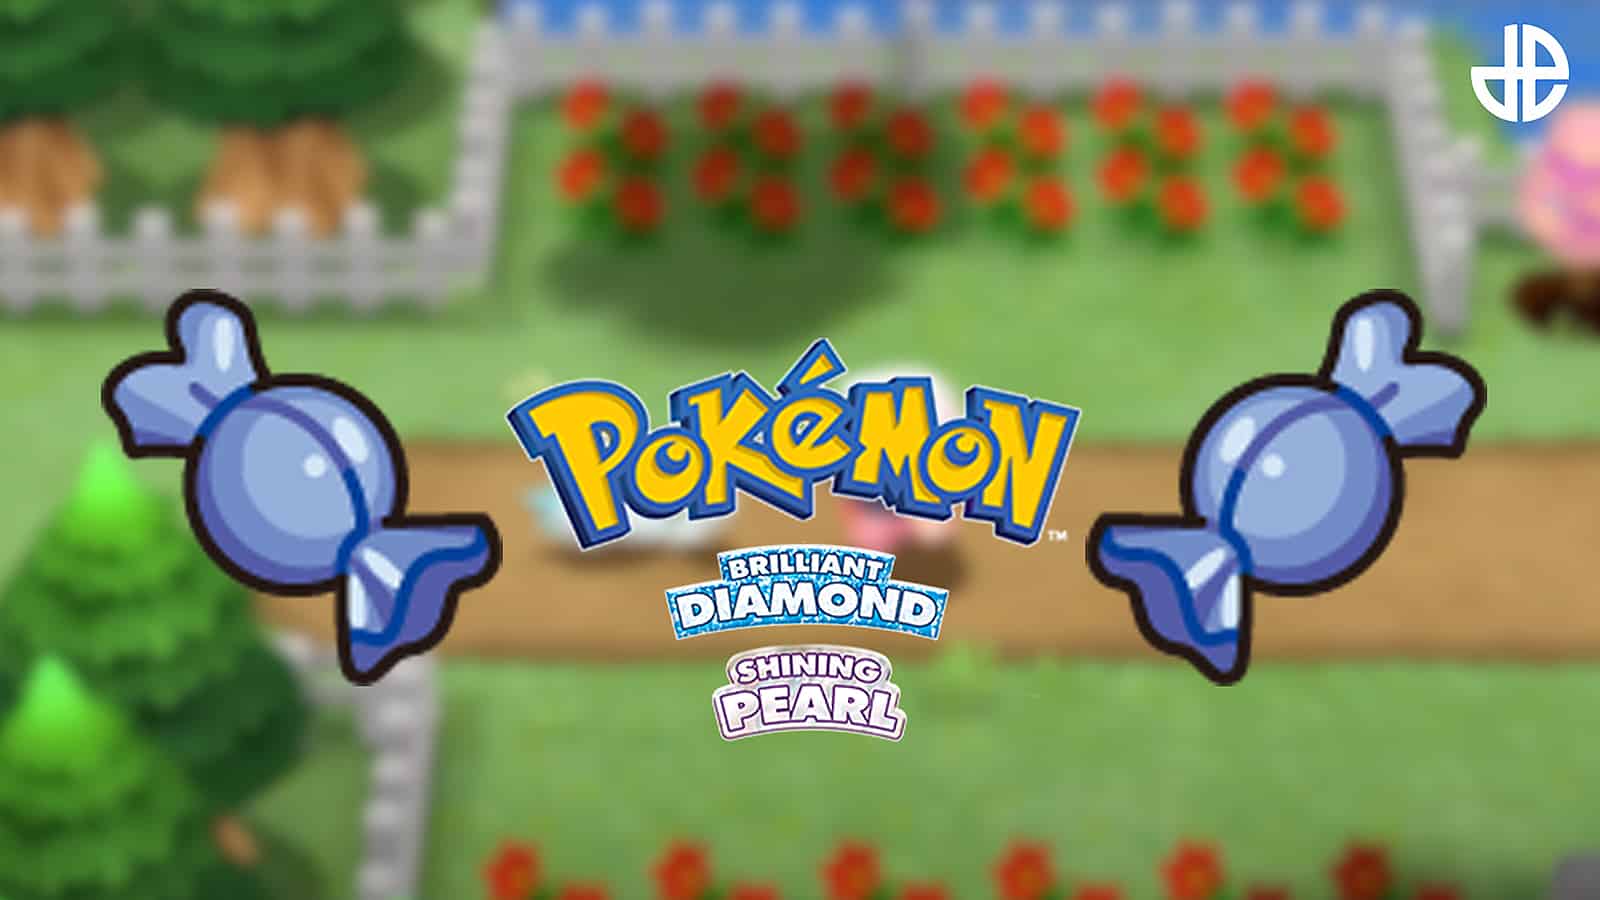 Pokemon Brilliant Diamong & Shining Pearl logos, with images of Rare Candy on a blurred background of gameplay